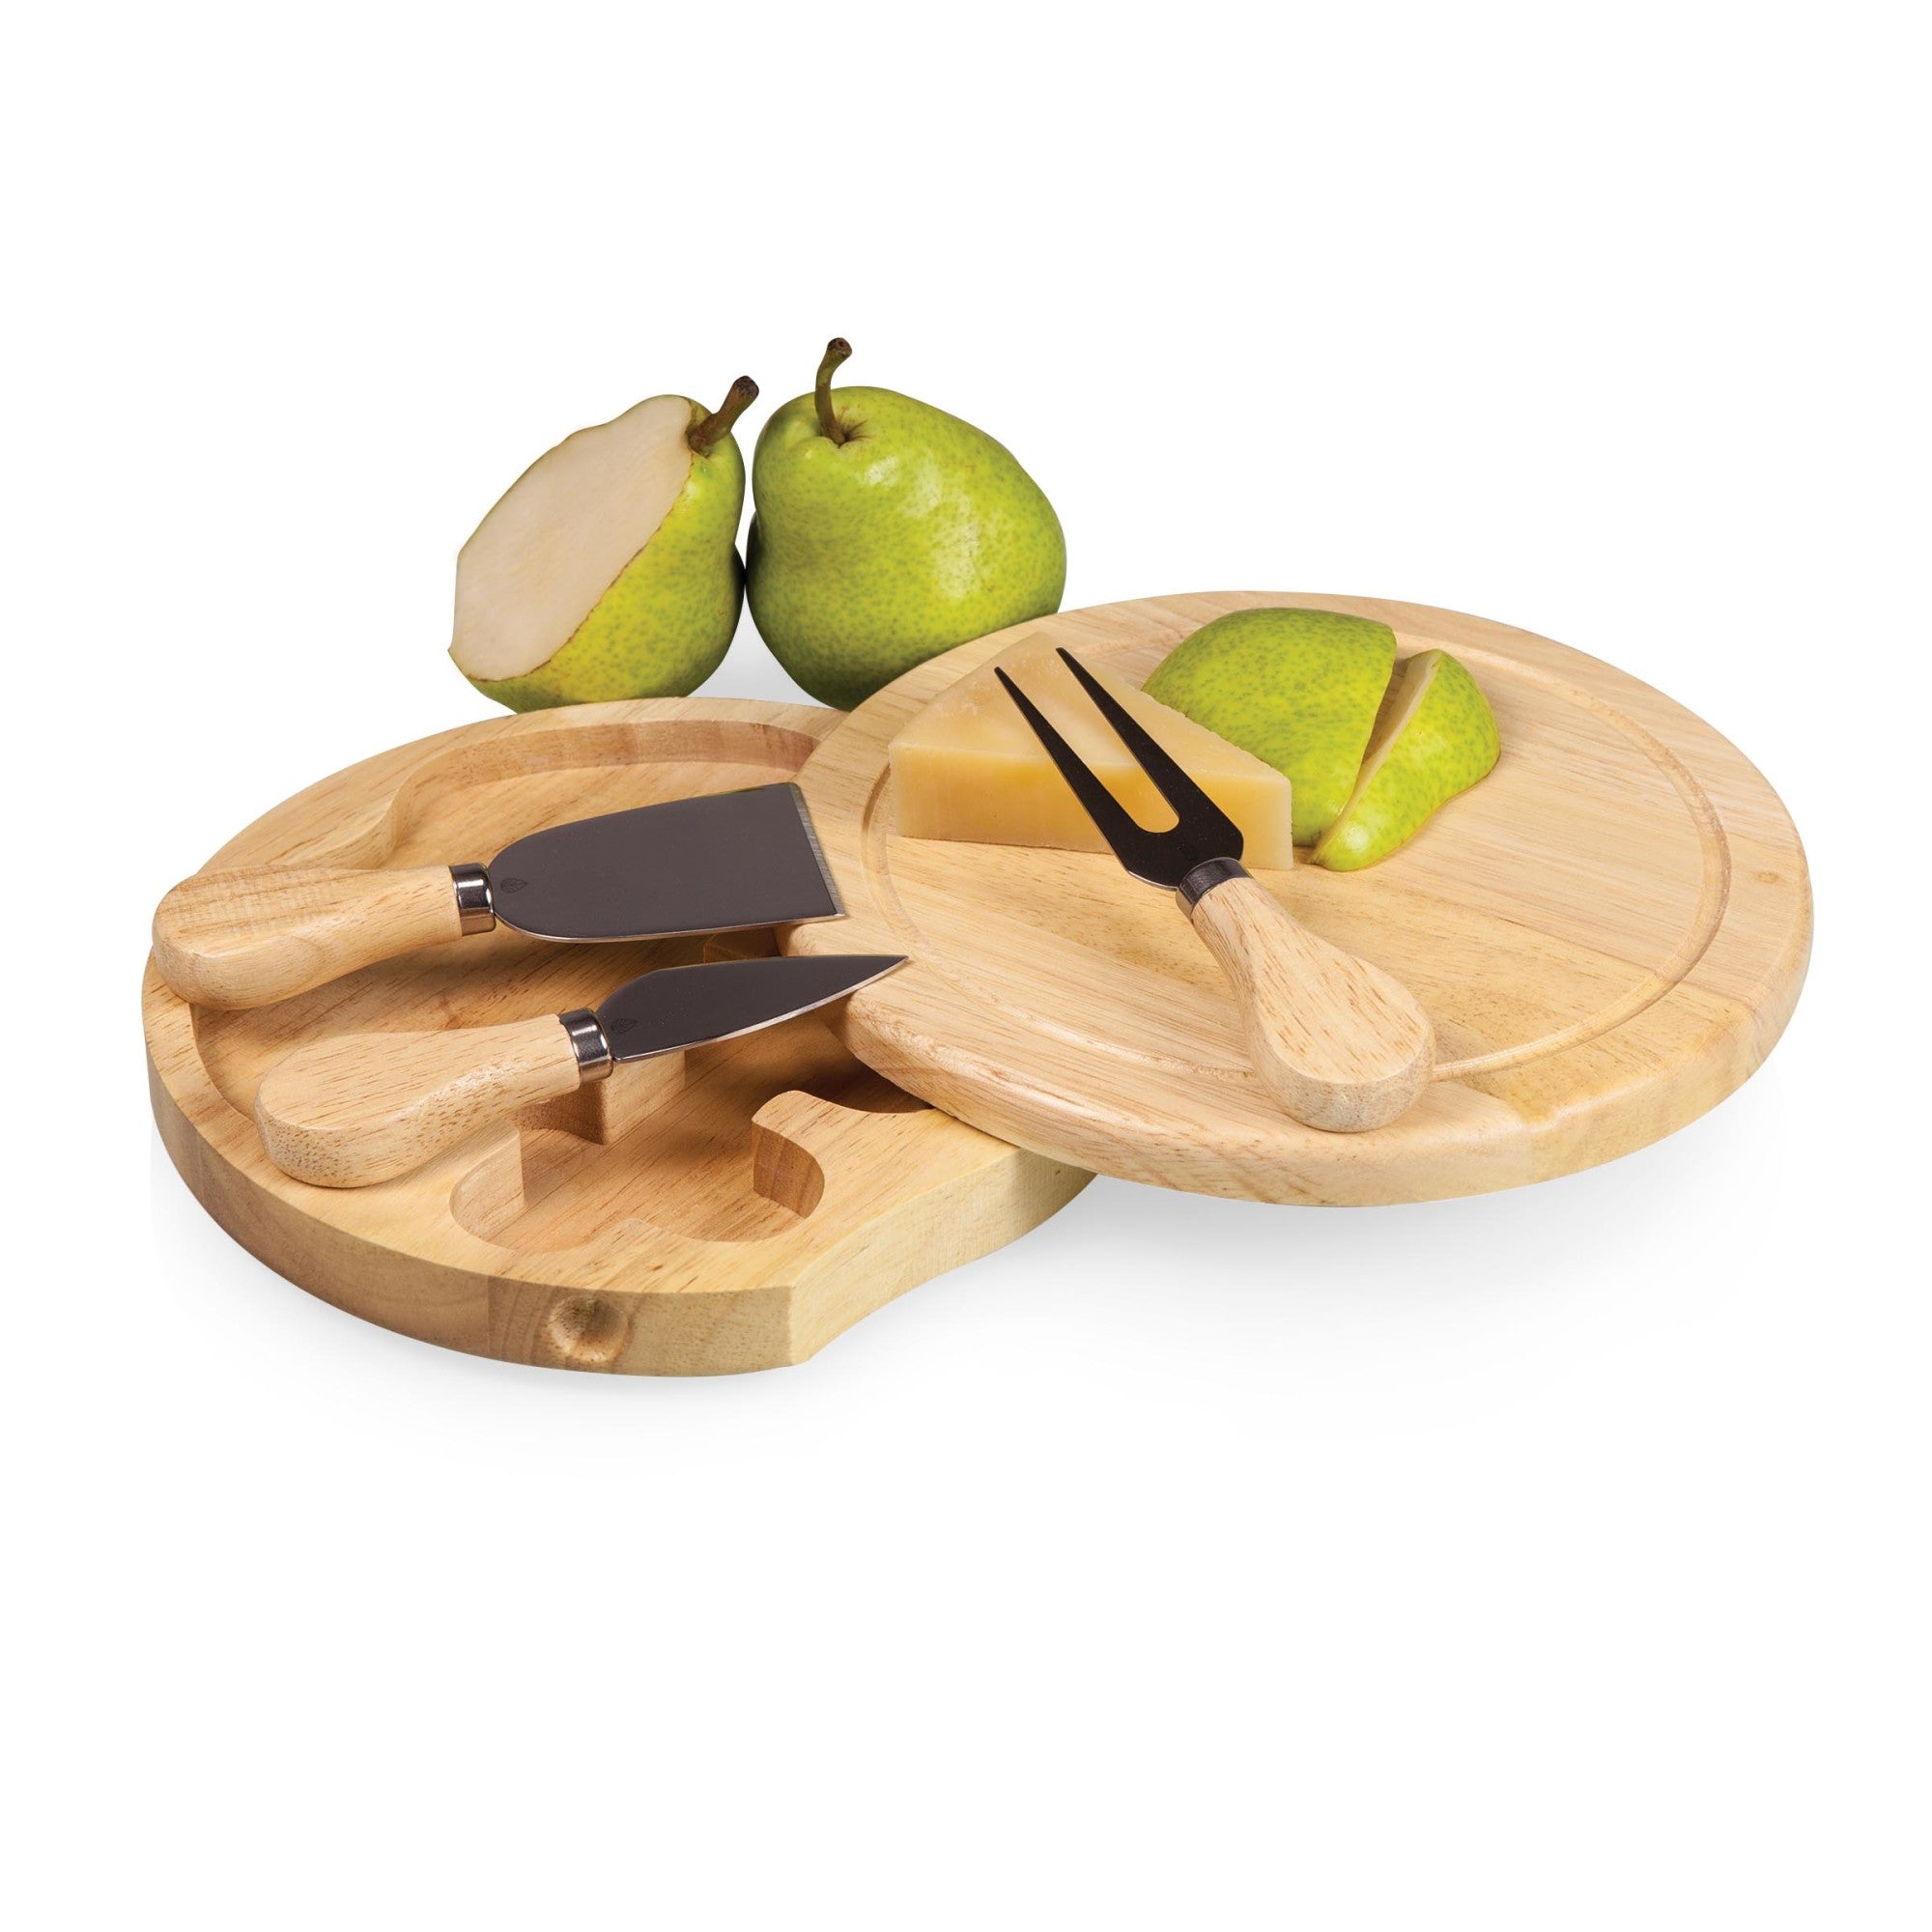 Pittsburgh Steelers - Brie Cheese Cutting Board & Tools Set